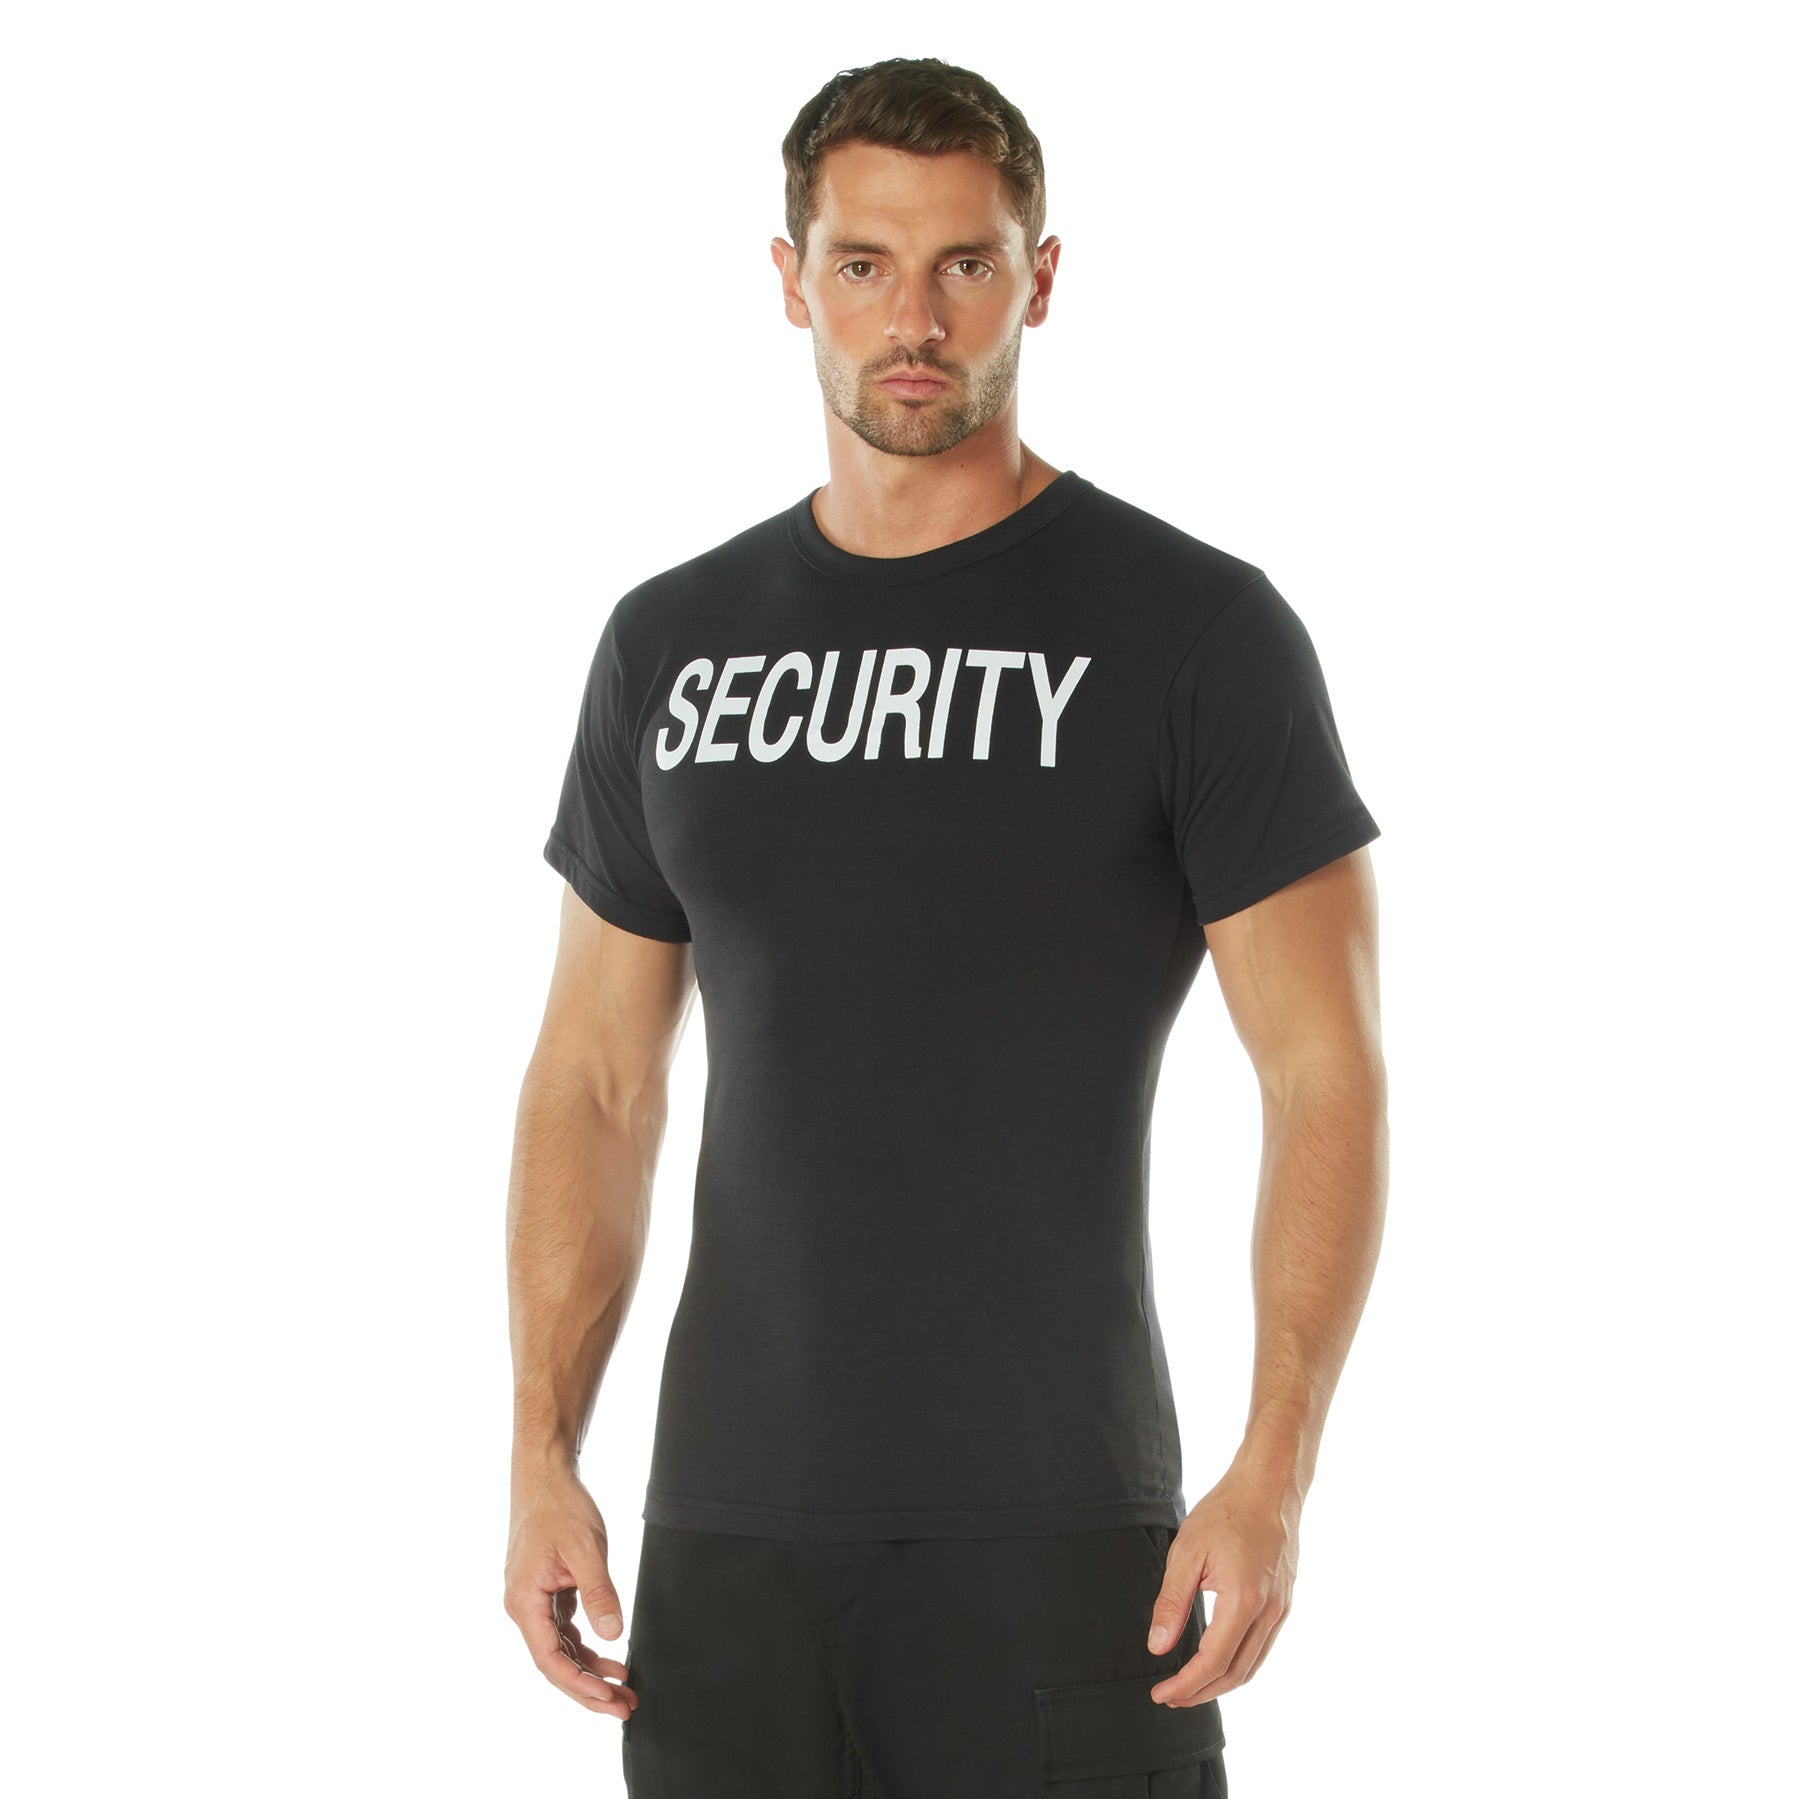 [Public Safety] Poly/Cotton 2-Sided Security T-Shirts Security White - Black